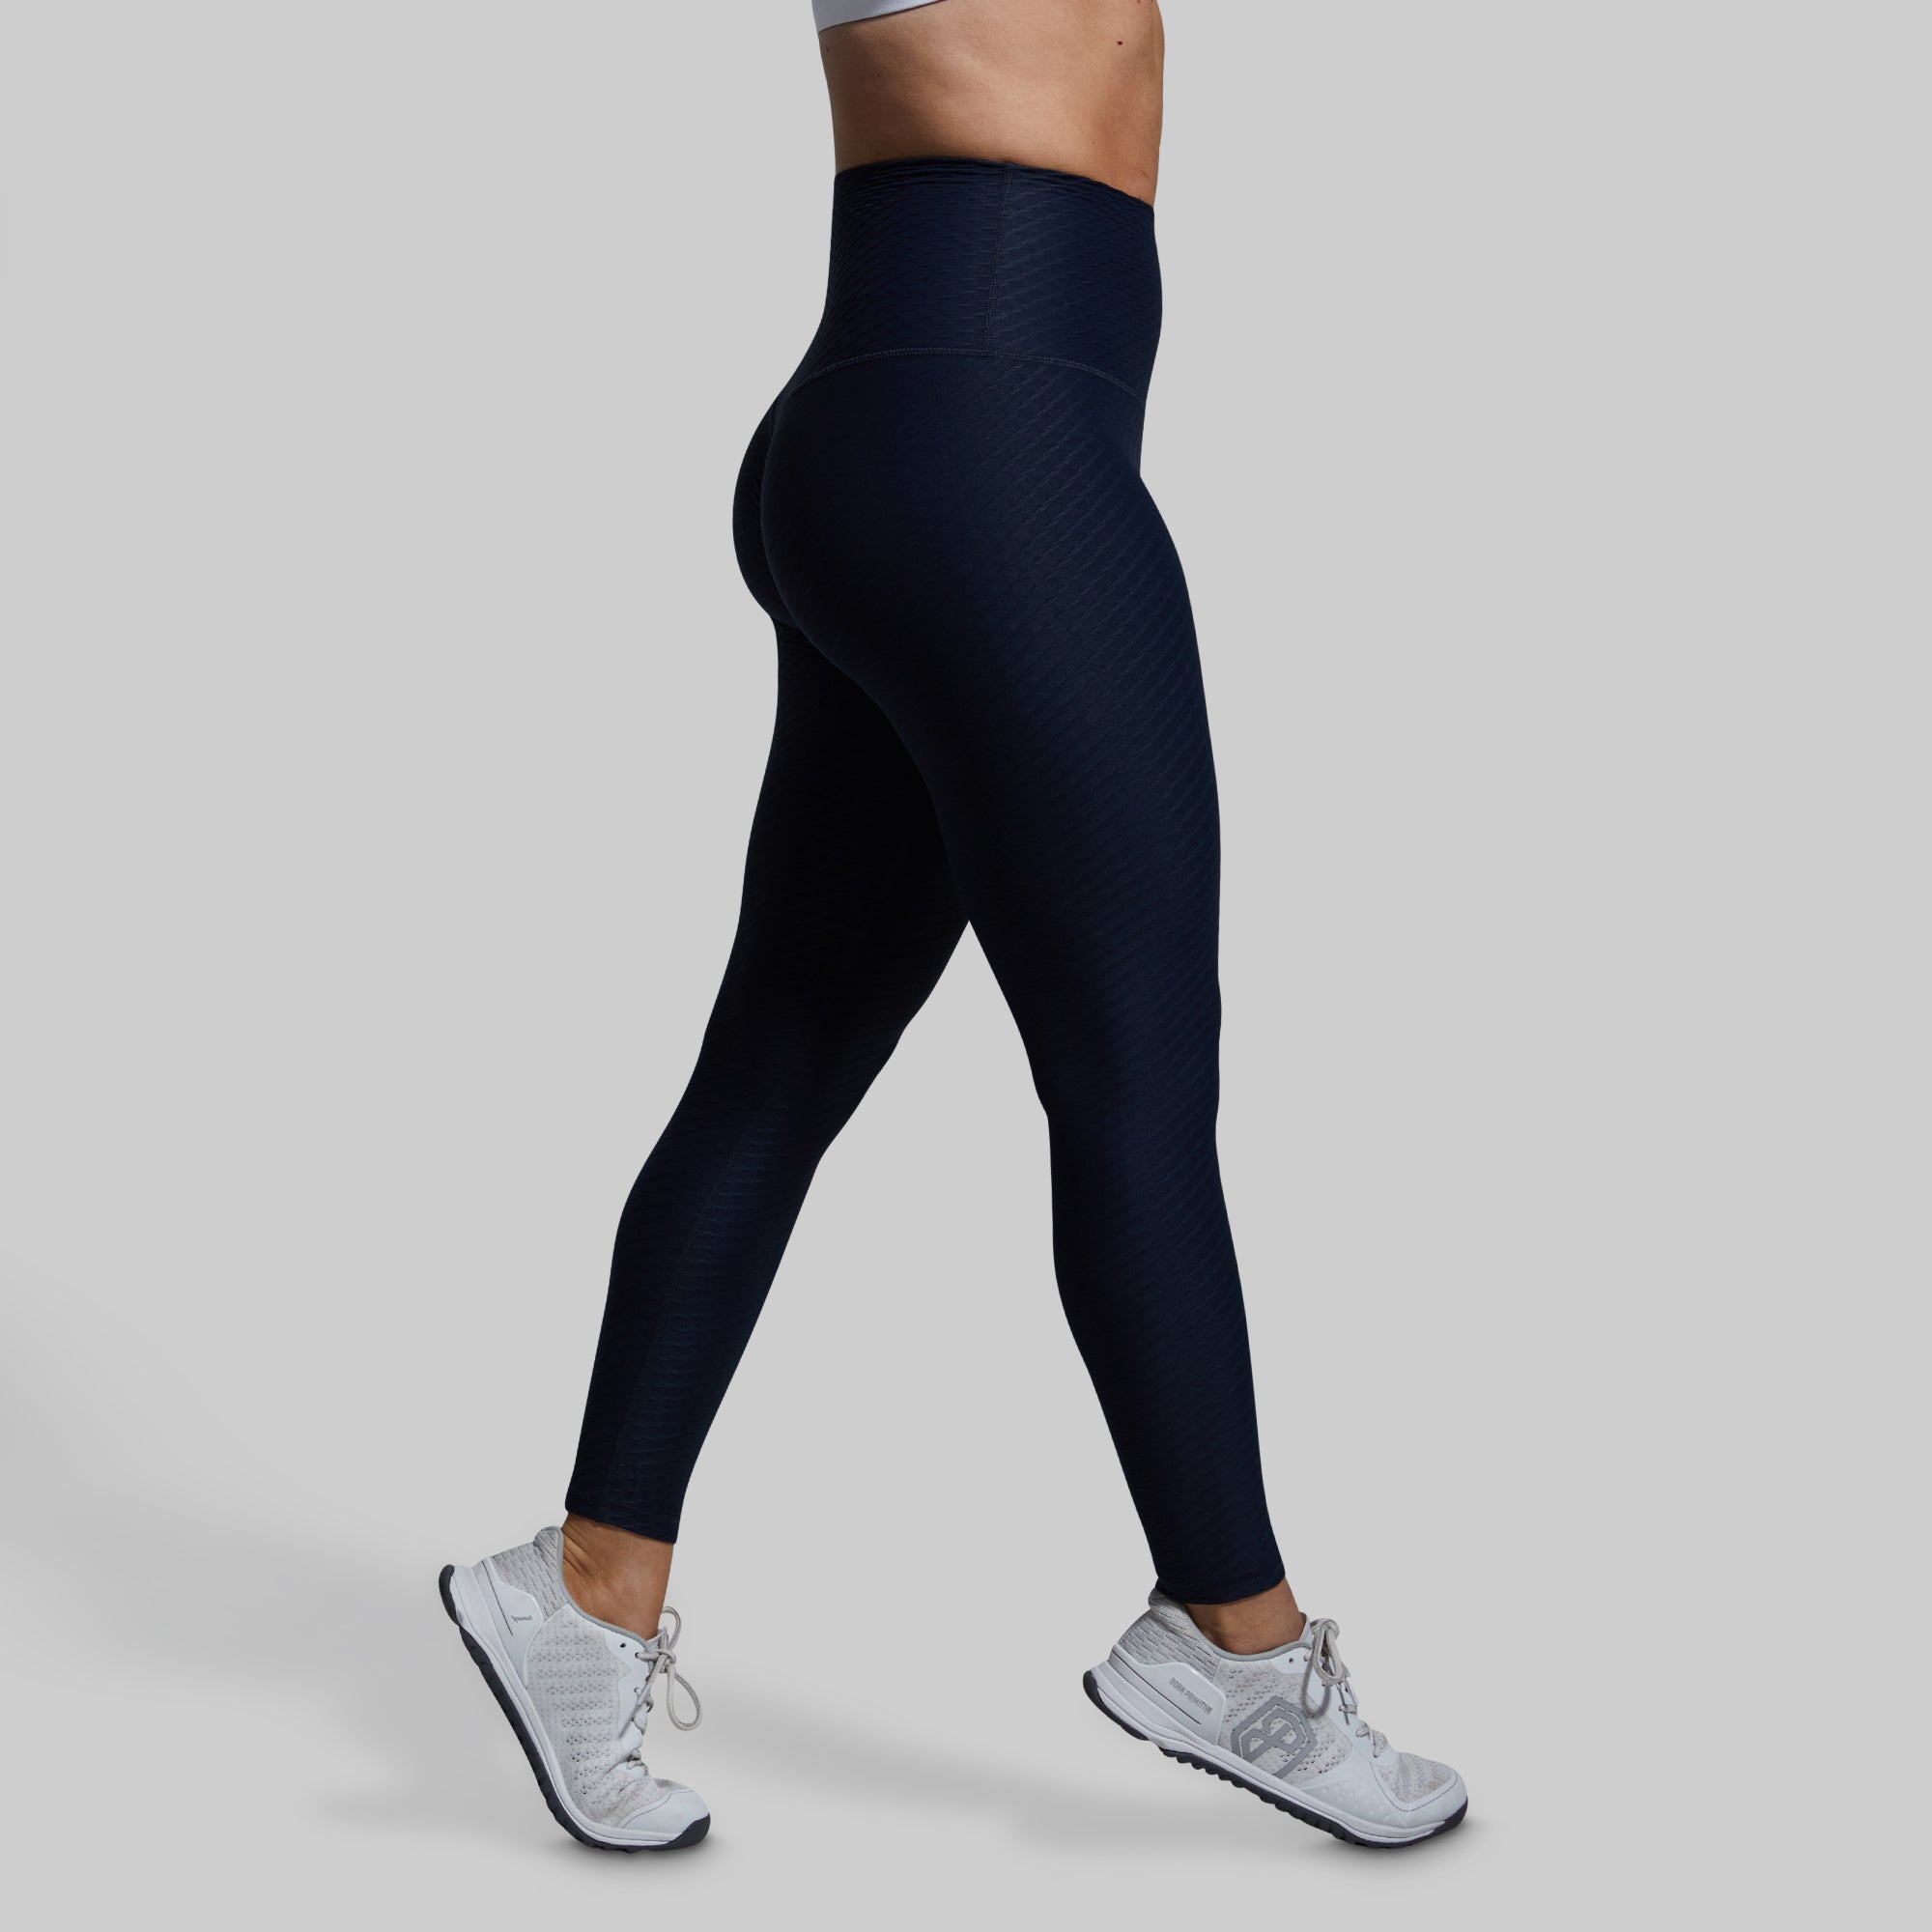 BornPrimitive on X: Leggings that embody excellence? We've got 'em.⁠ And  they're backed by over 1,100 5-star reviews.⁠ ⁠ Try our Paragon leggings  today to find out for yourself.⁠  / X